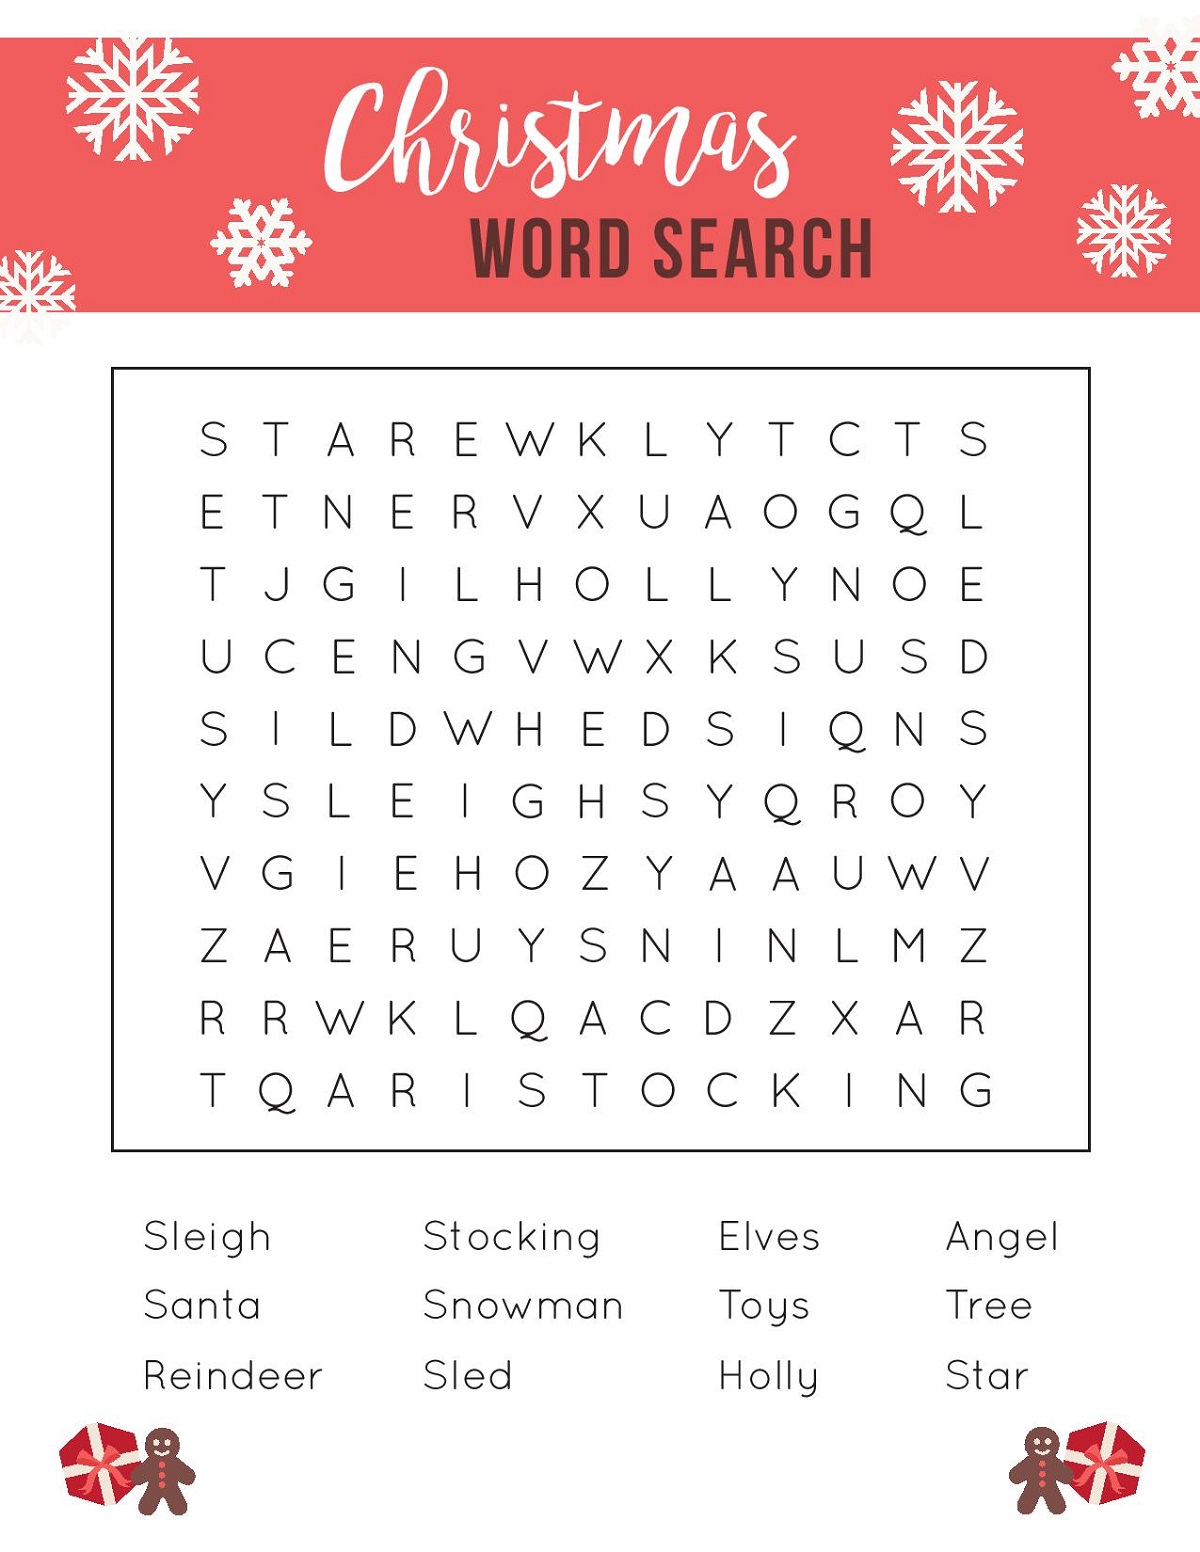 Christmas Wordsearch for Kids